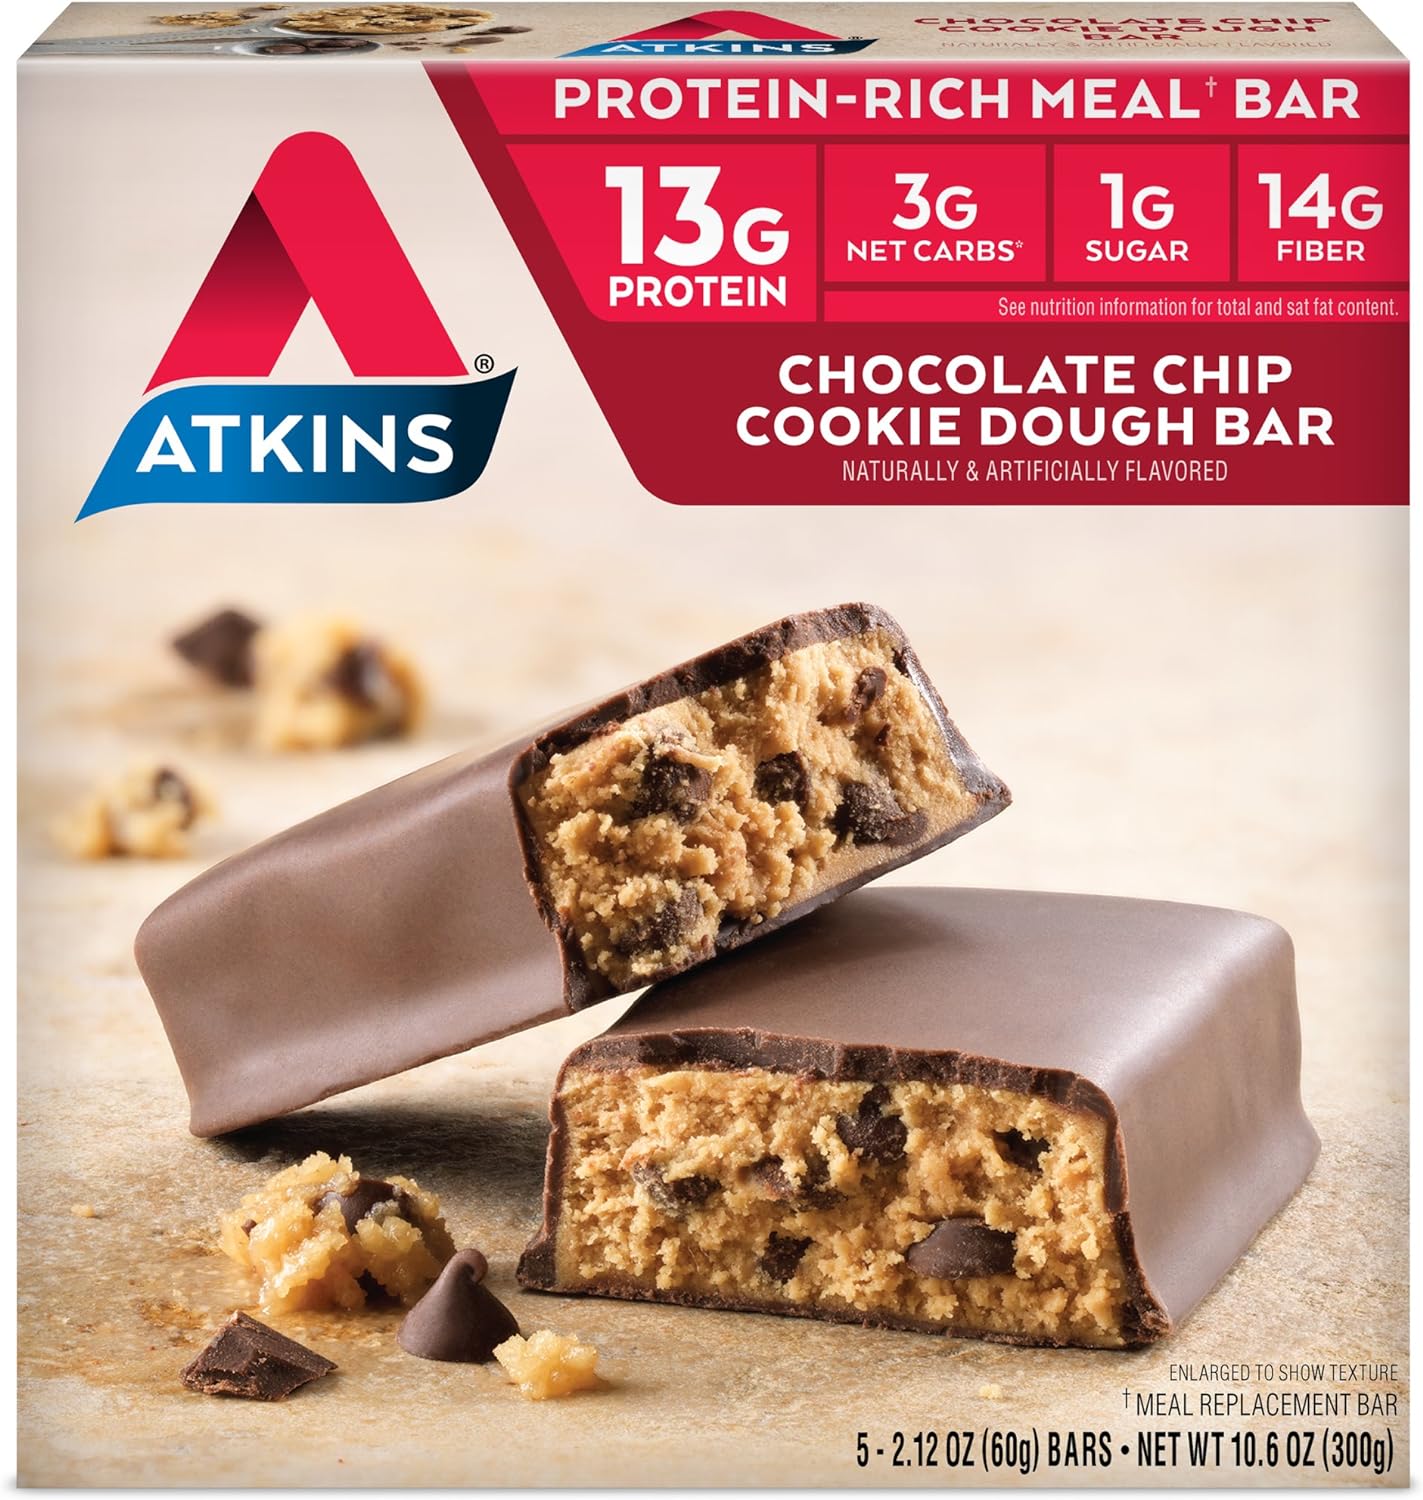 Atkins Chocolate Chip Cookie Dough Protein Meal Bar, High Fiber, 1g Sugar, 3g Net Carbs, Meal Replacement, 30 Count